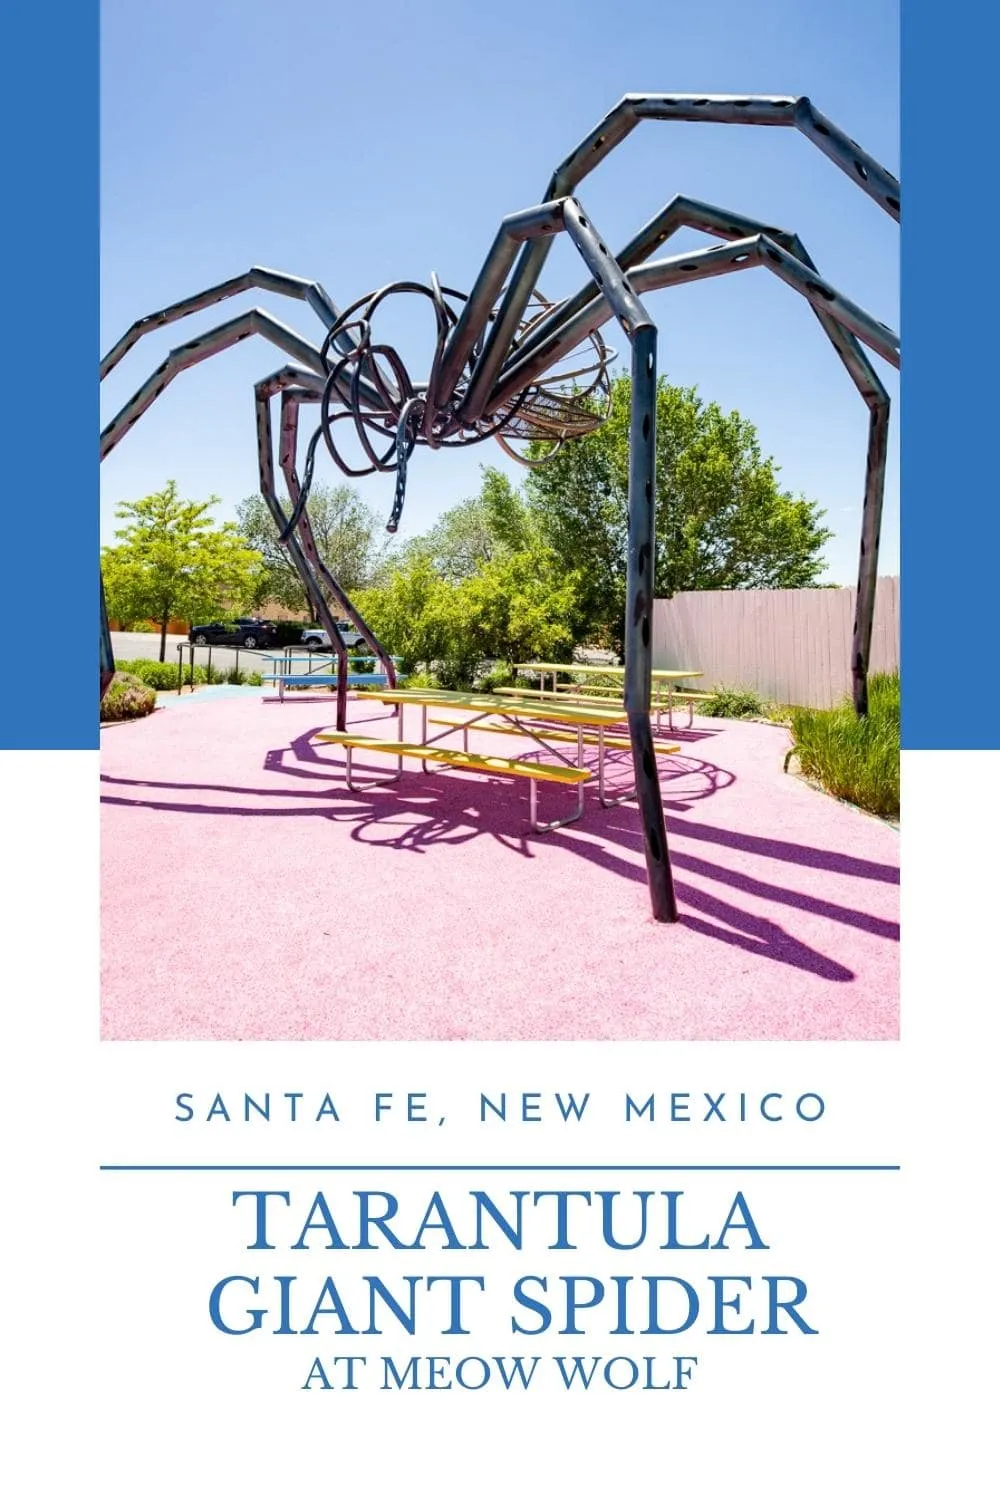 This roadside attraction is one of the best on the web. Find TaranTula, the giant spider sculpture in front of Meow Wolf in Santa Fe, New Mexico. The giant spider sculpture is officially titled "TaranTula" and was created by artist Christina Sporrong. The statue is 16-feet tall and constructed out of steel. It has a permanent home in the parking lot outside of Meow Wolf’s House of Eternal Return. #MeowWolf #RoadsideAttraction #RoadsideAttractions #NewMexicoRoadsideAttraction